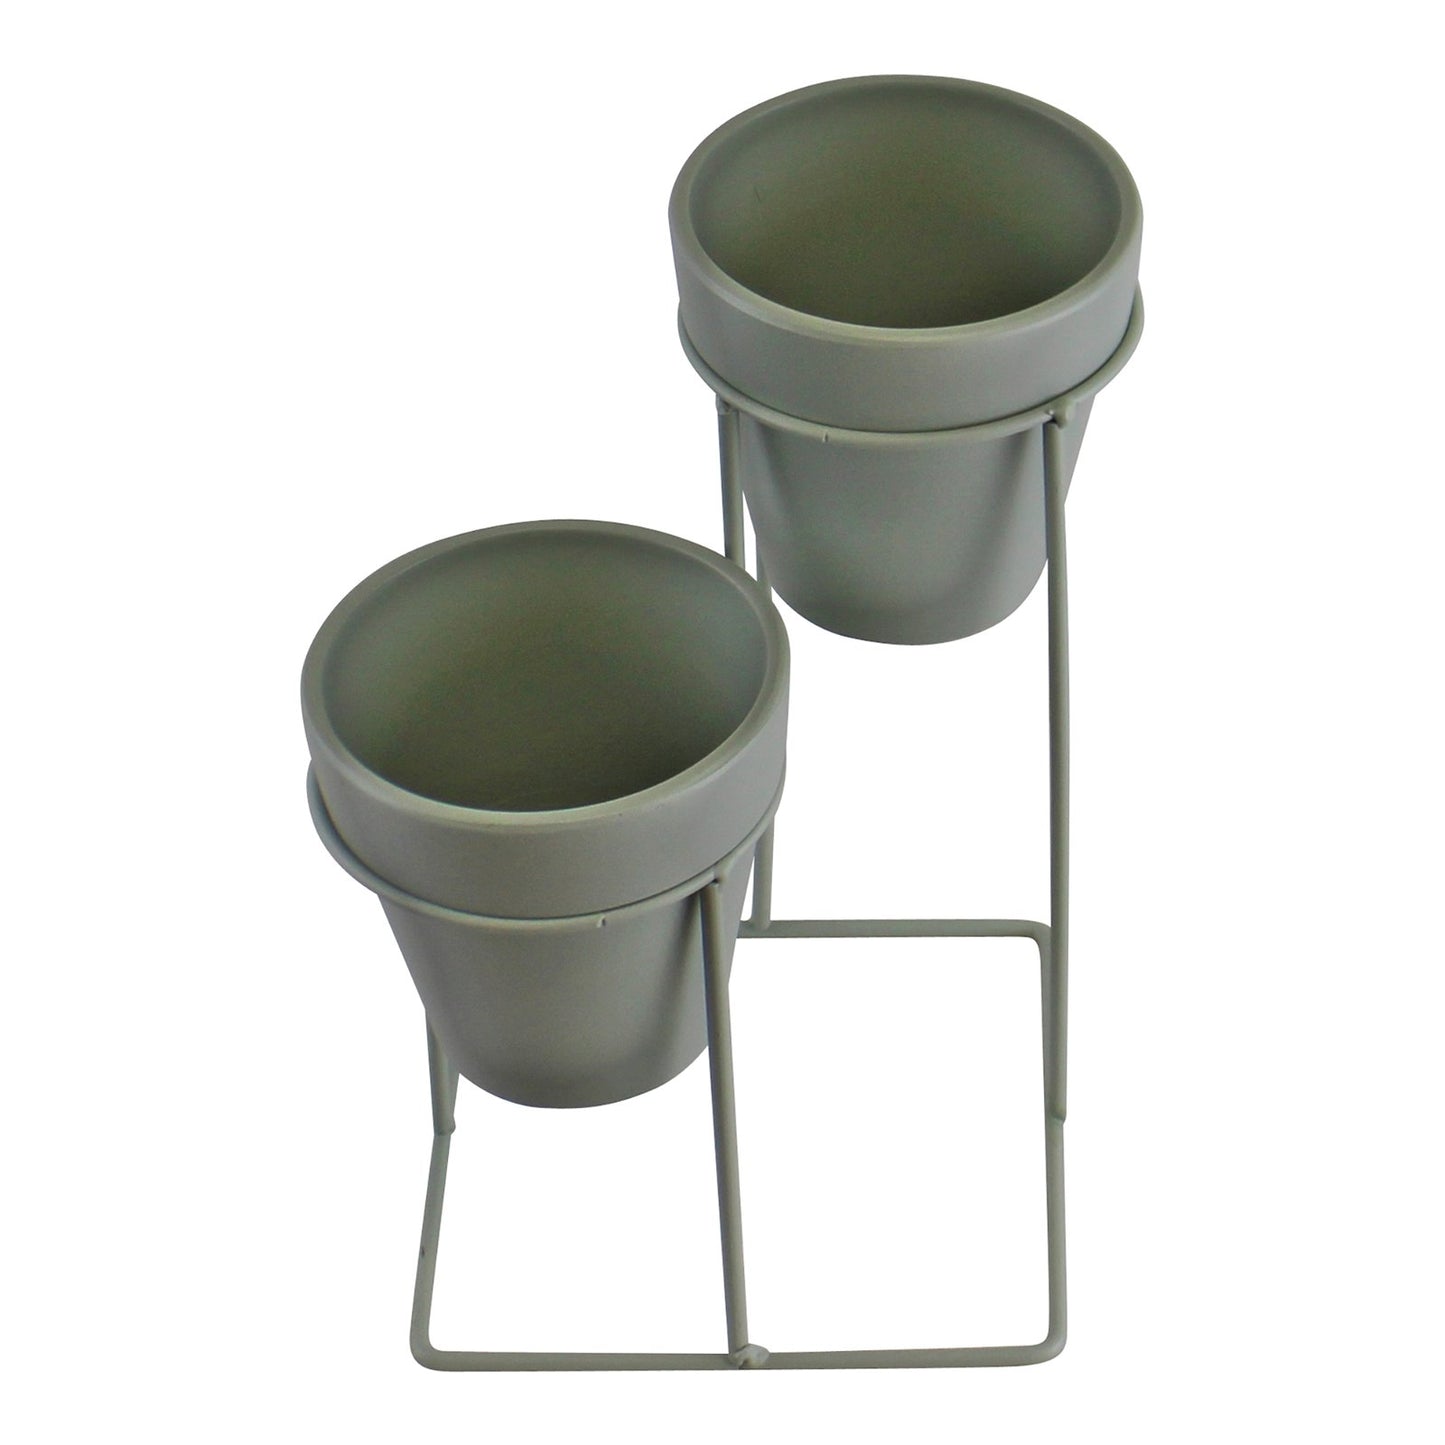 Potting Shed Small Double Planter On Stand, Green - Kaftan direct